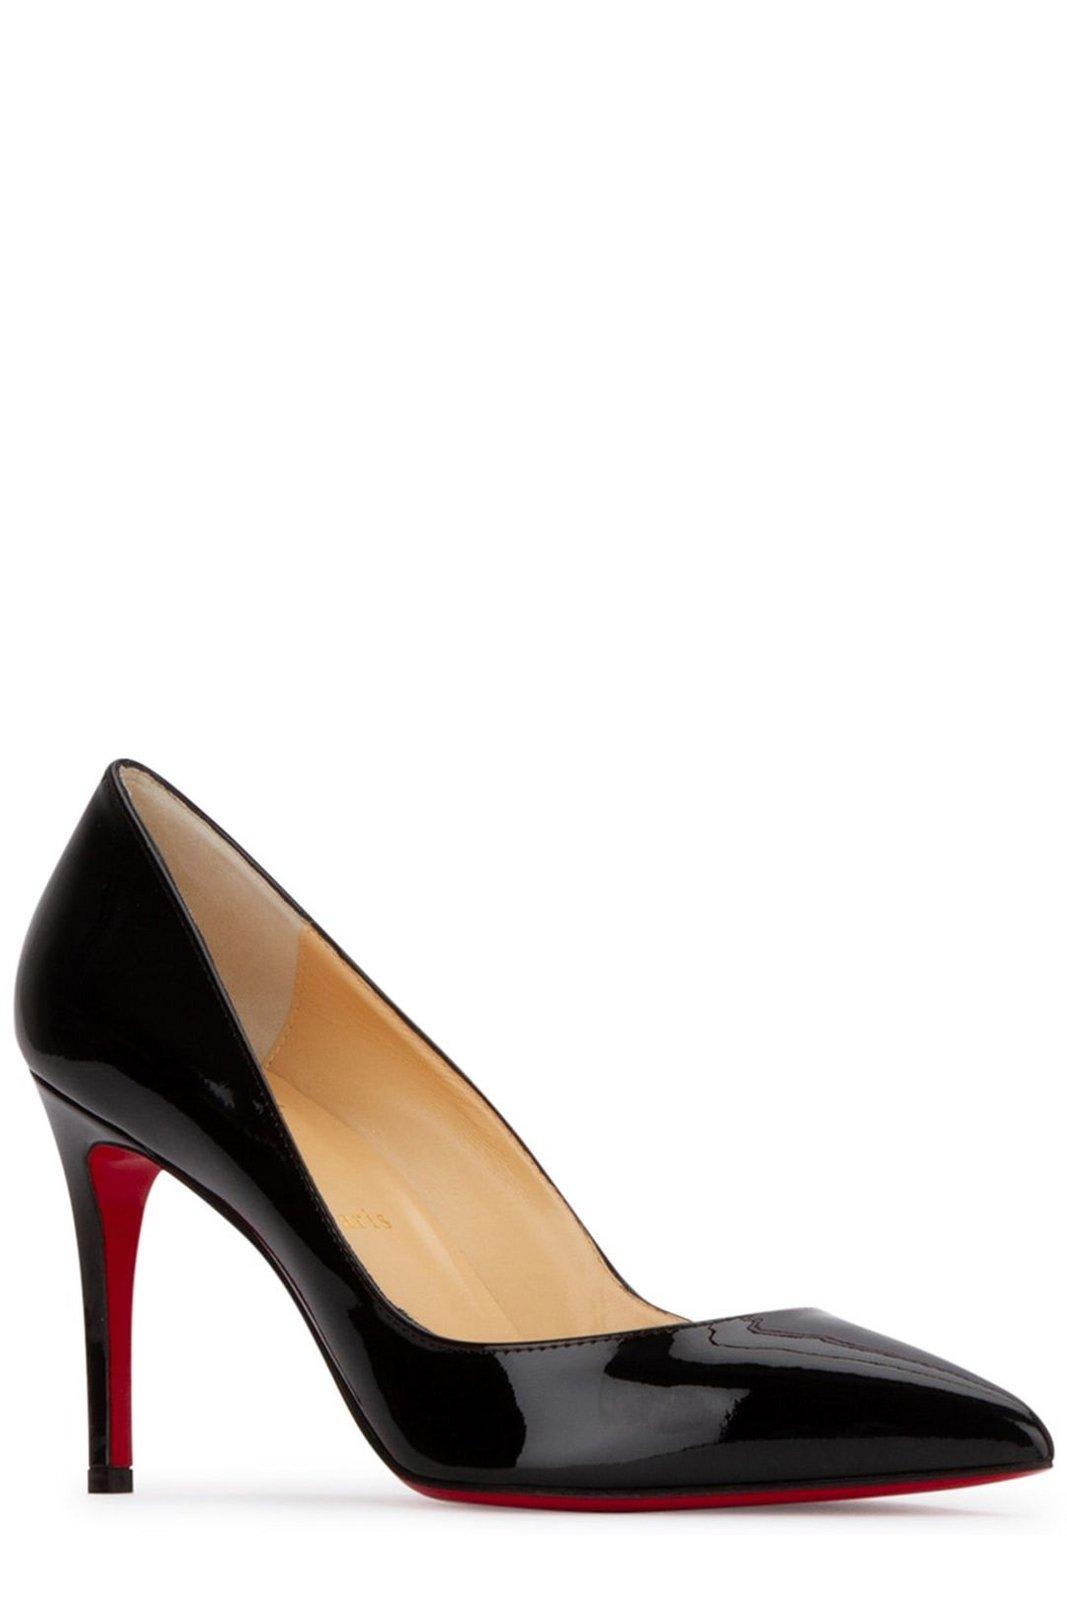 What's the Difference: Christian Louboutin's Pigalle, Pigalle